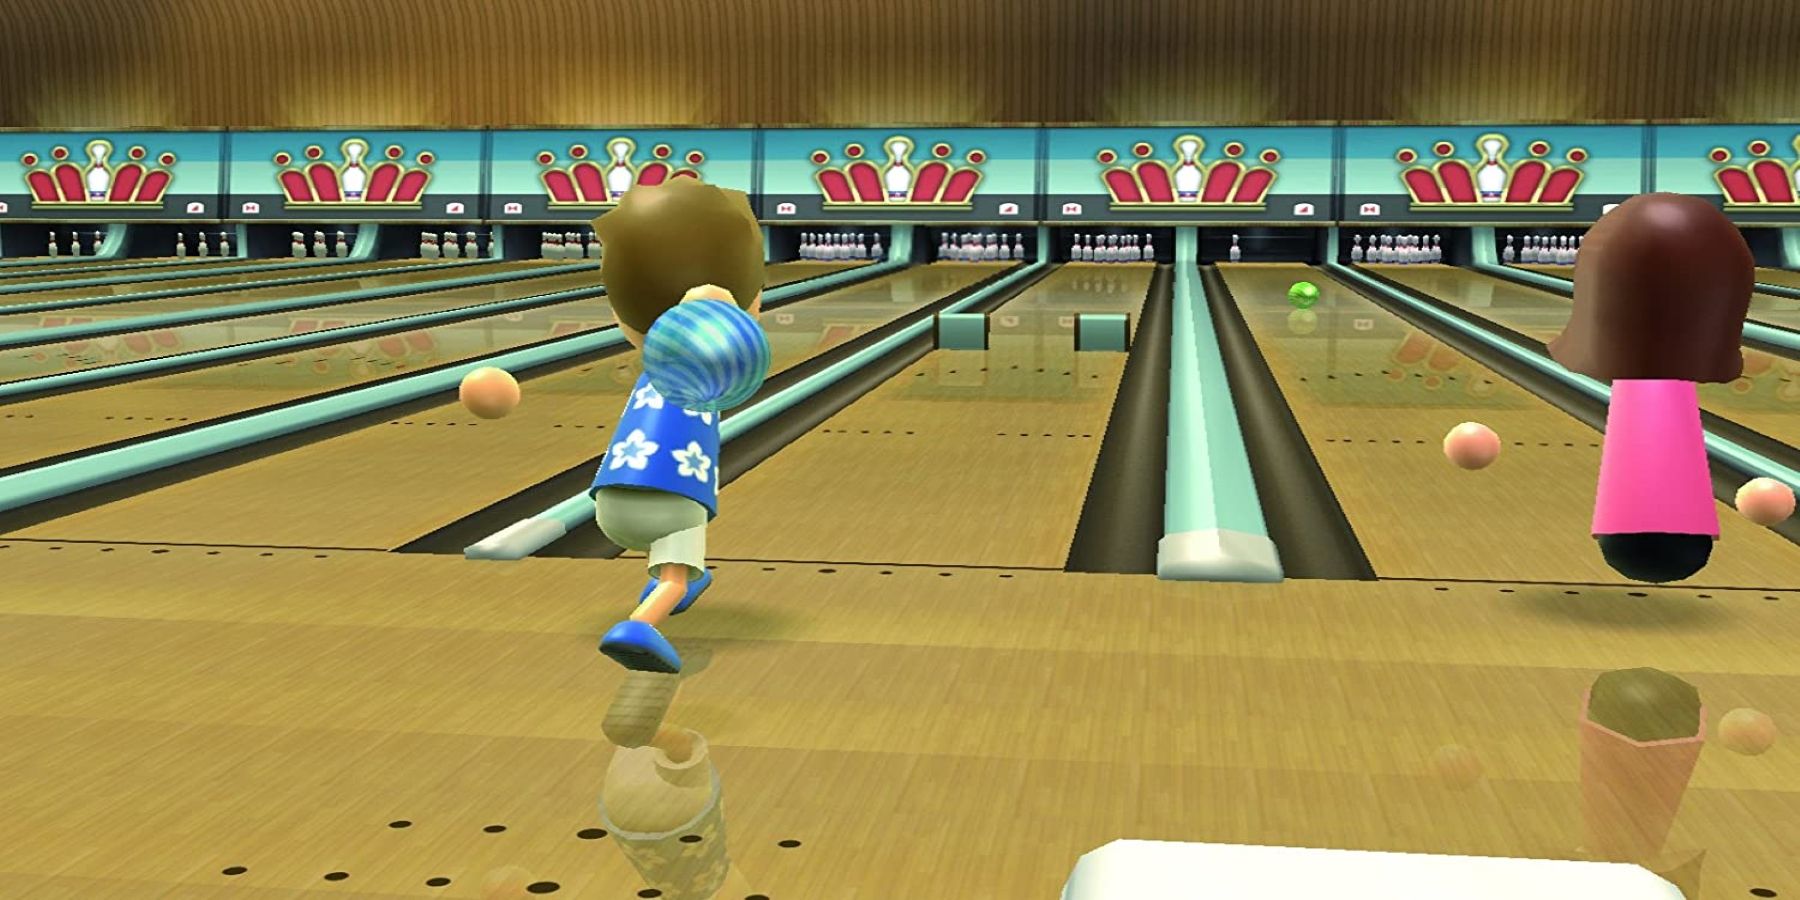 Viral Video Shows People Playing Wii Bowling In Real Life